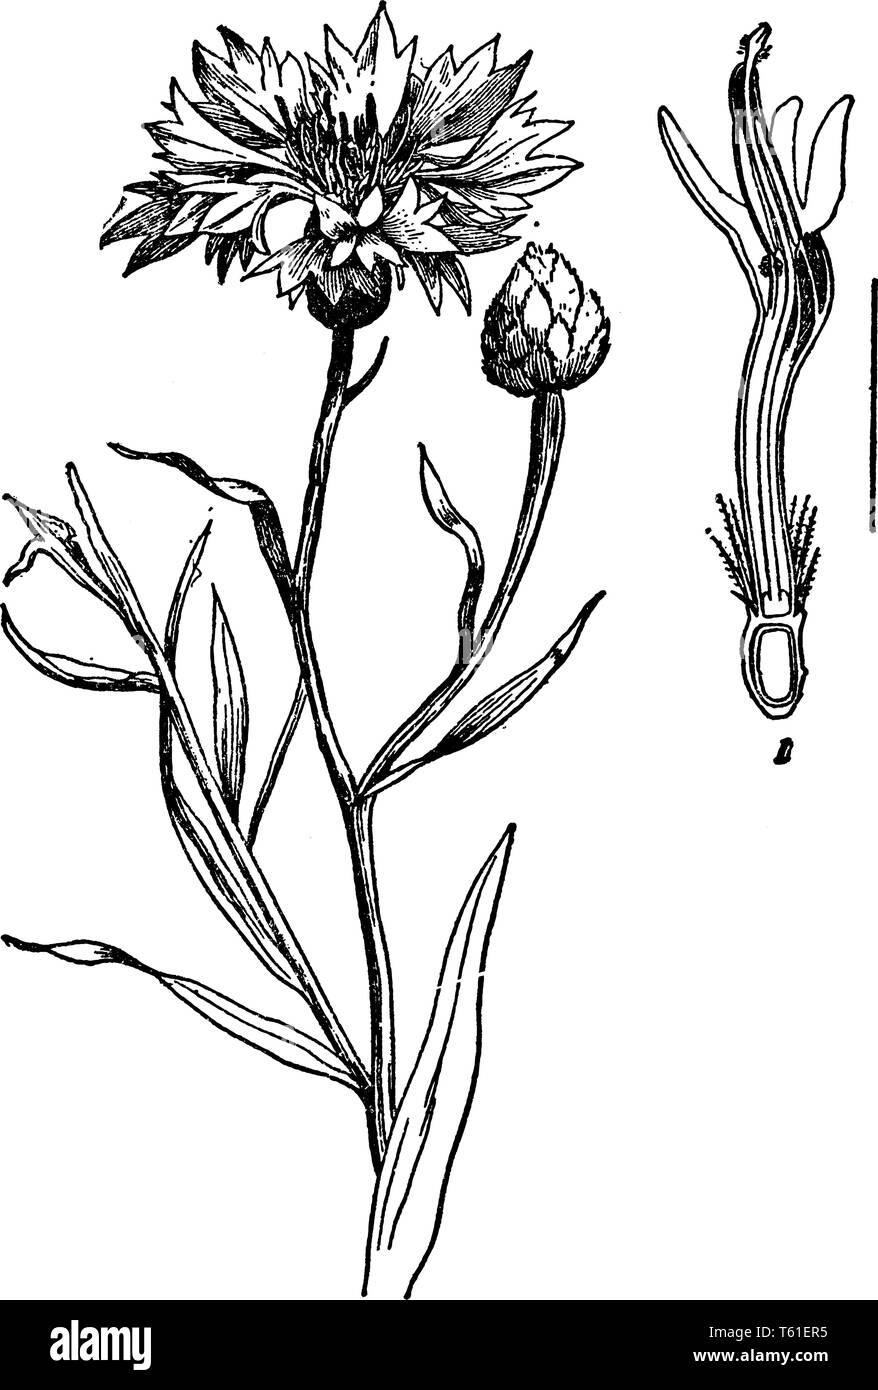 Cornflower is the plant of southern and south eastern United States. It is grown for its yellow flowers that can be dried, vintage line drawing or eng Stock Vector